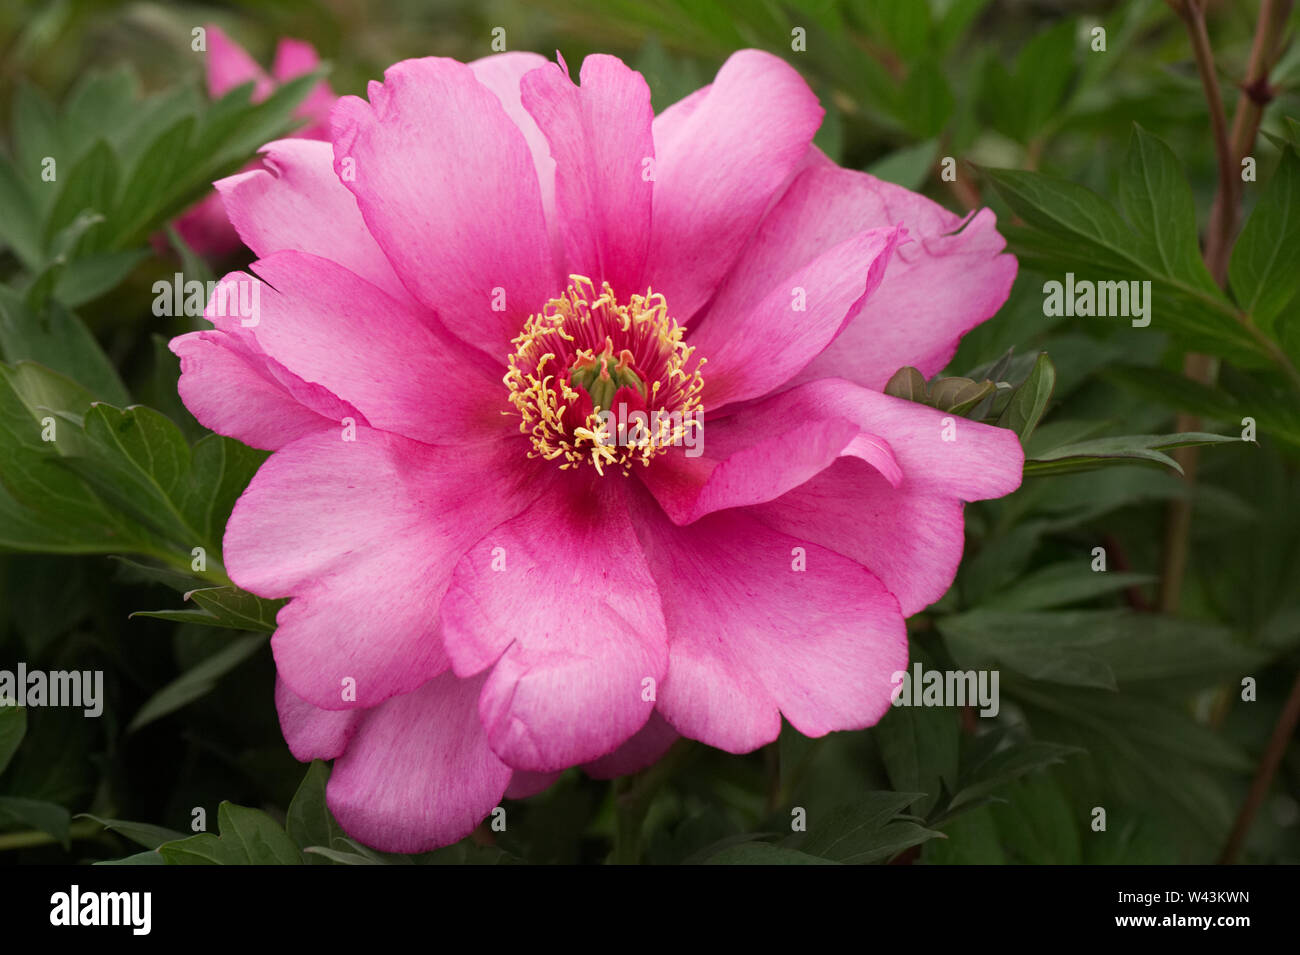 Paeonia 'First Arrival' flower. Stock Photo